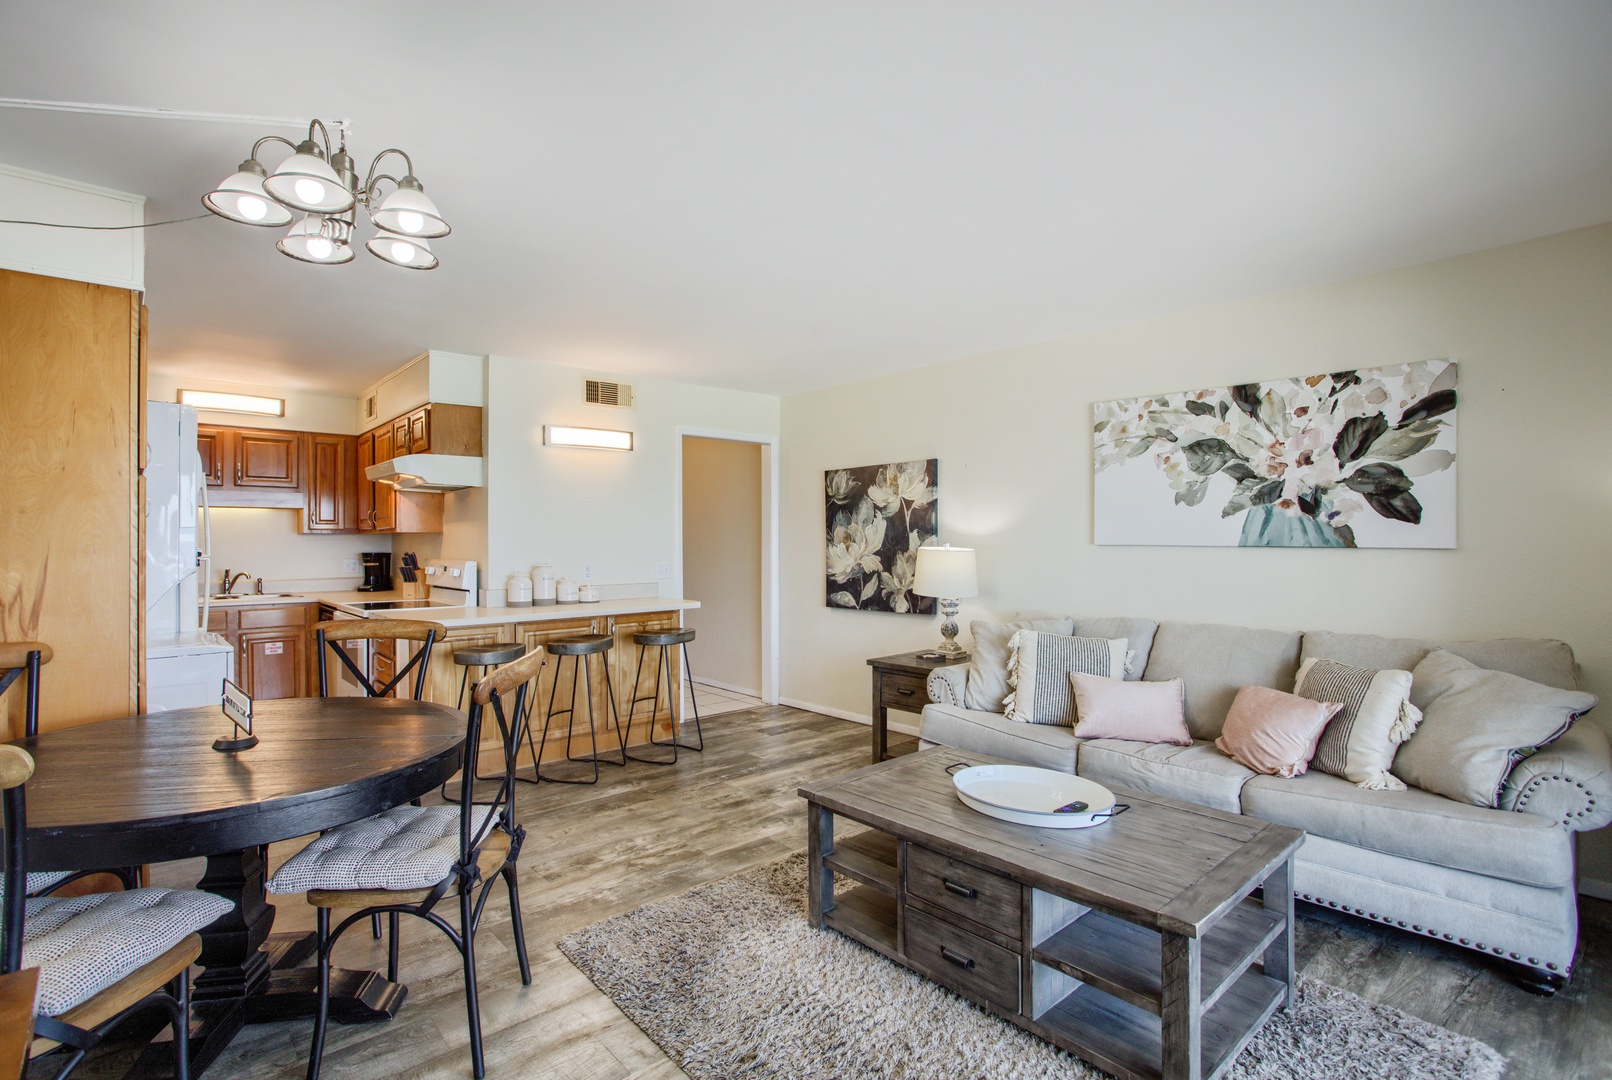 The open Kitchen, Dining, and Living Areas offer lots of space with a total of 7 Dining & Counter seats